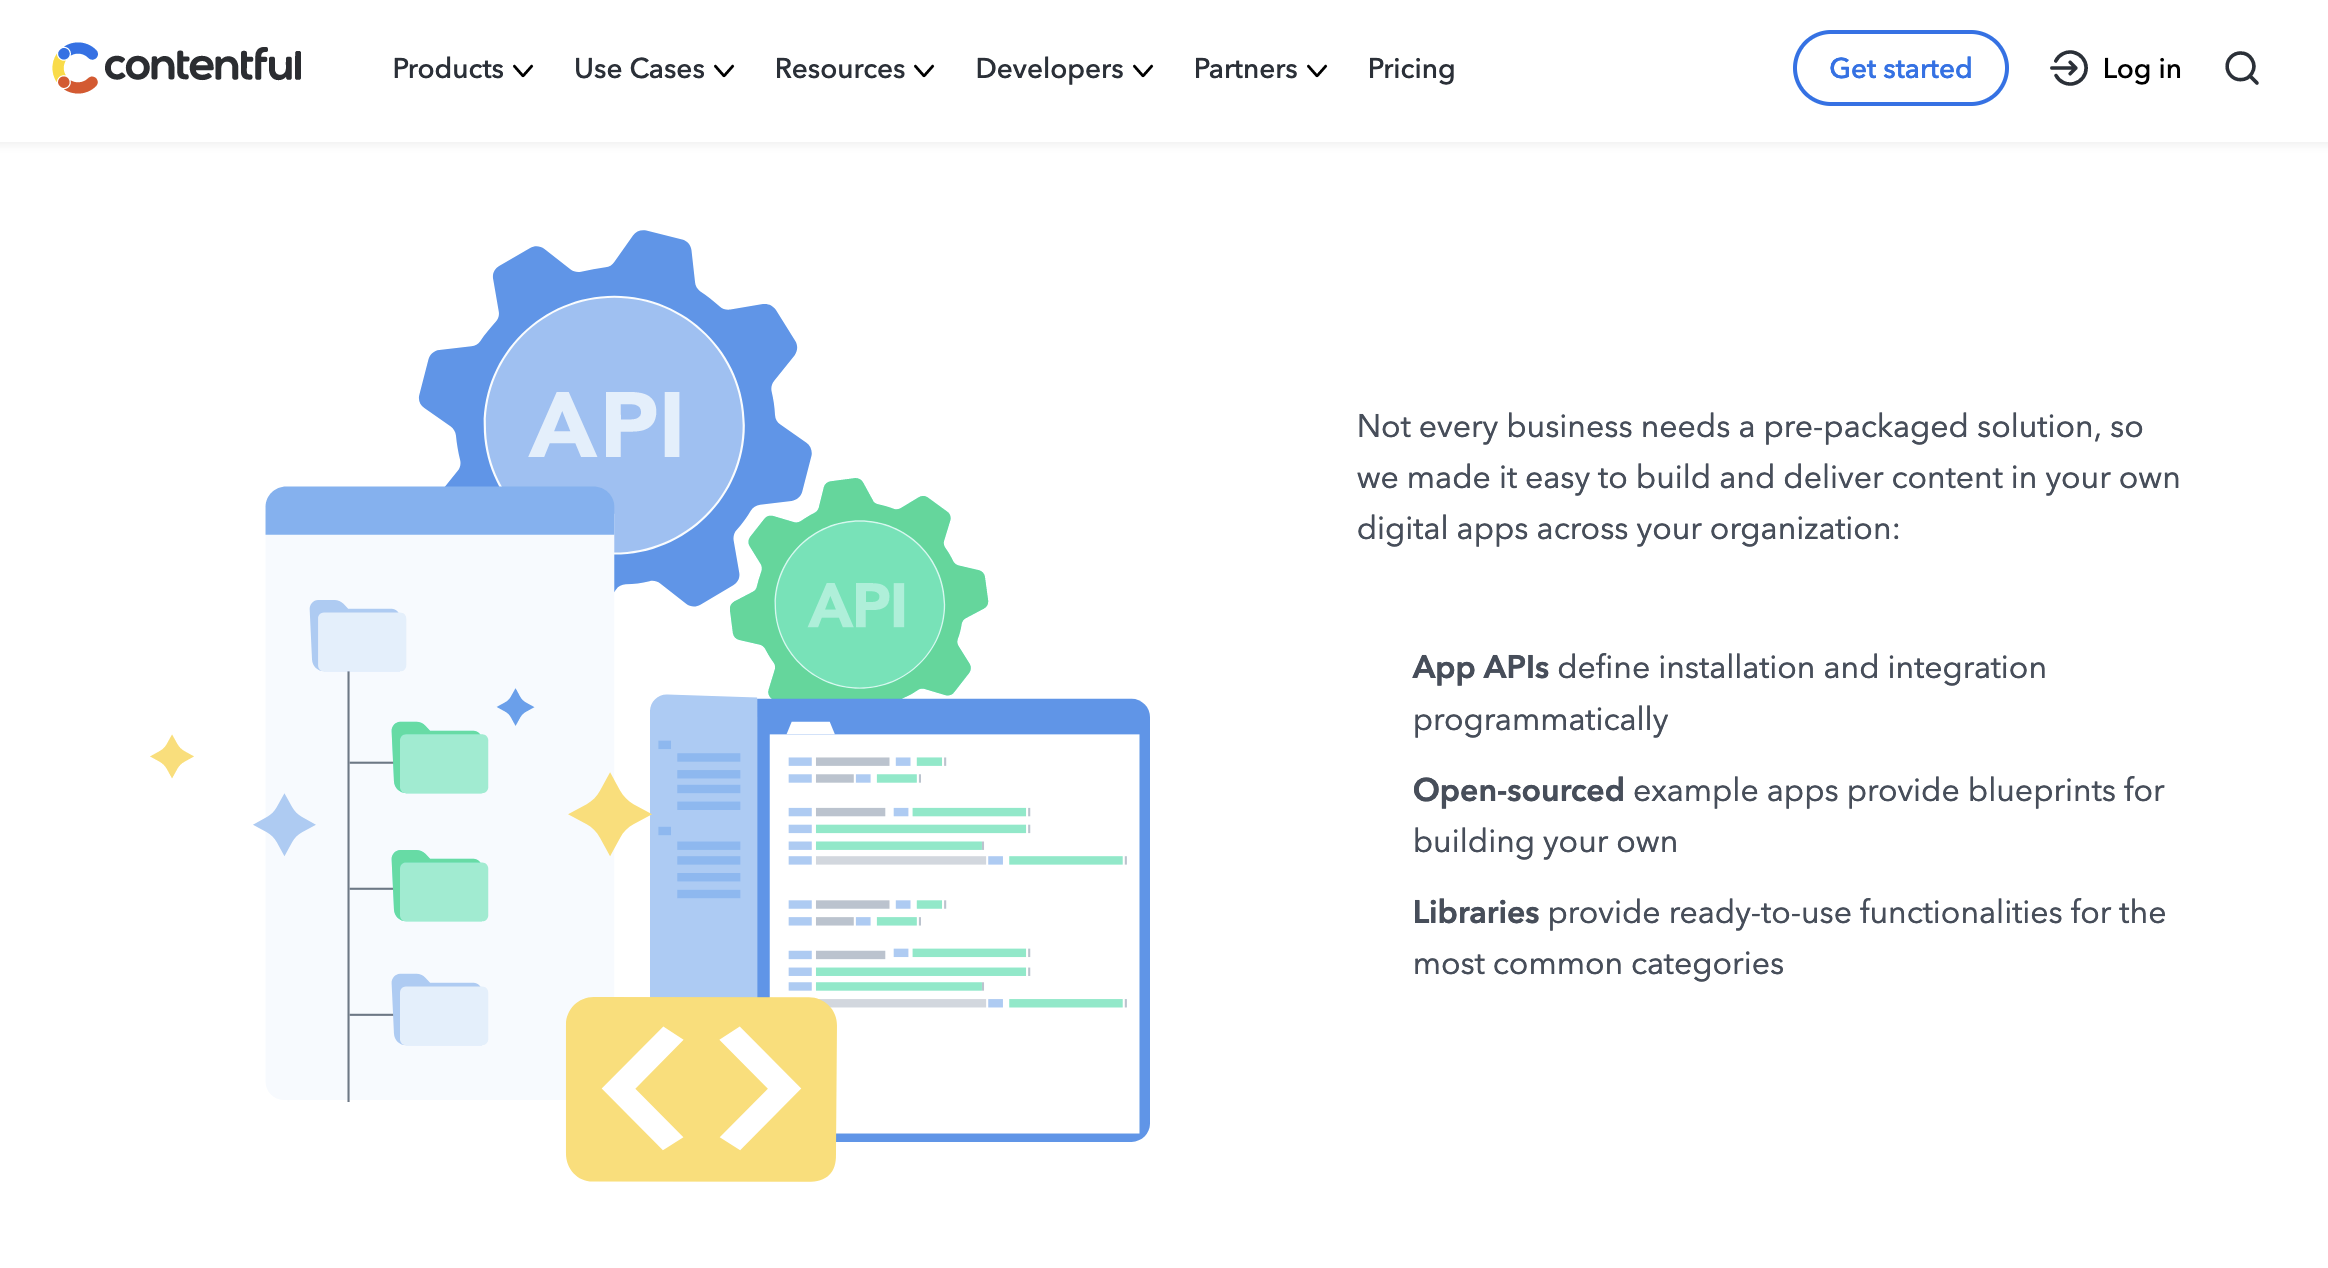 Low Code & No Code API Solutions - Are they Right for You?